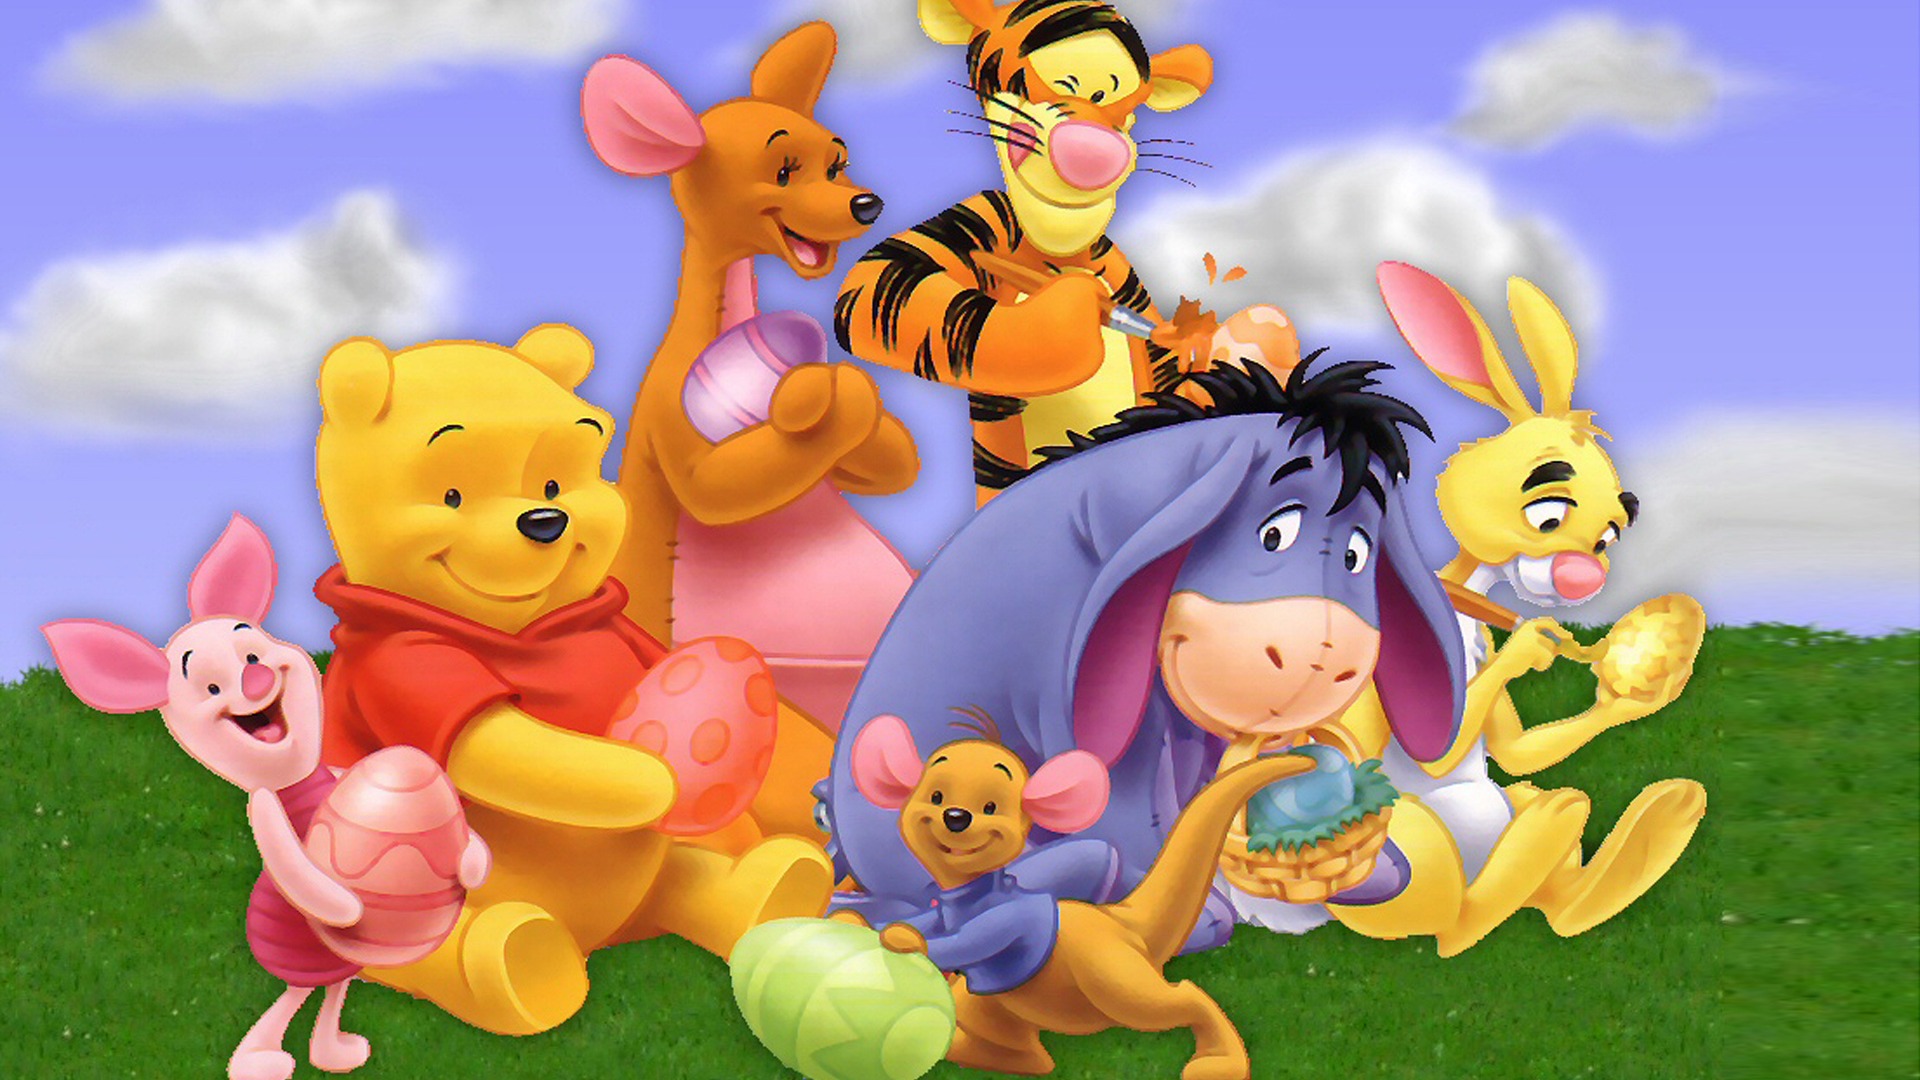 Winnie The Pooh Wallpapers for Desktop Computers